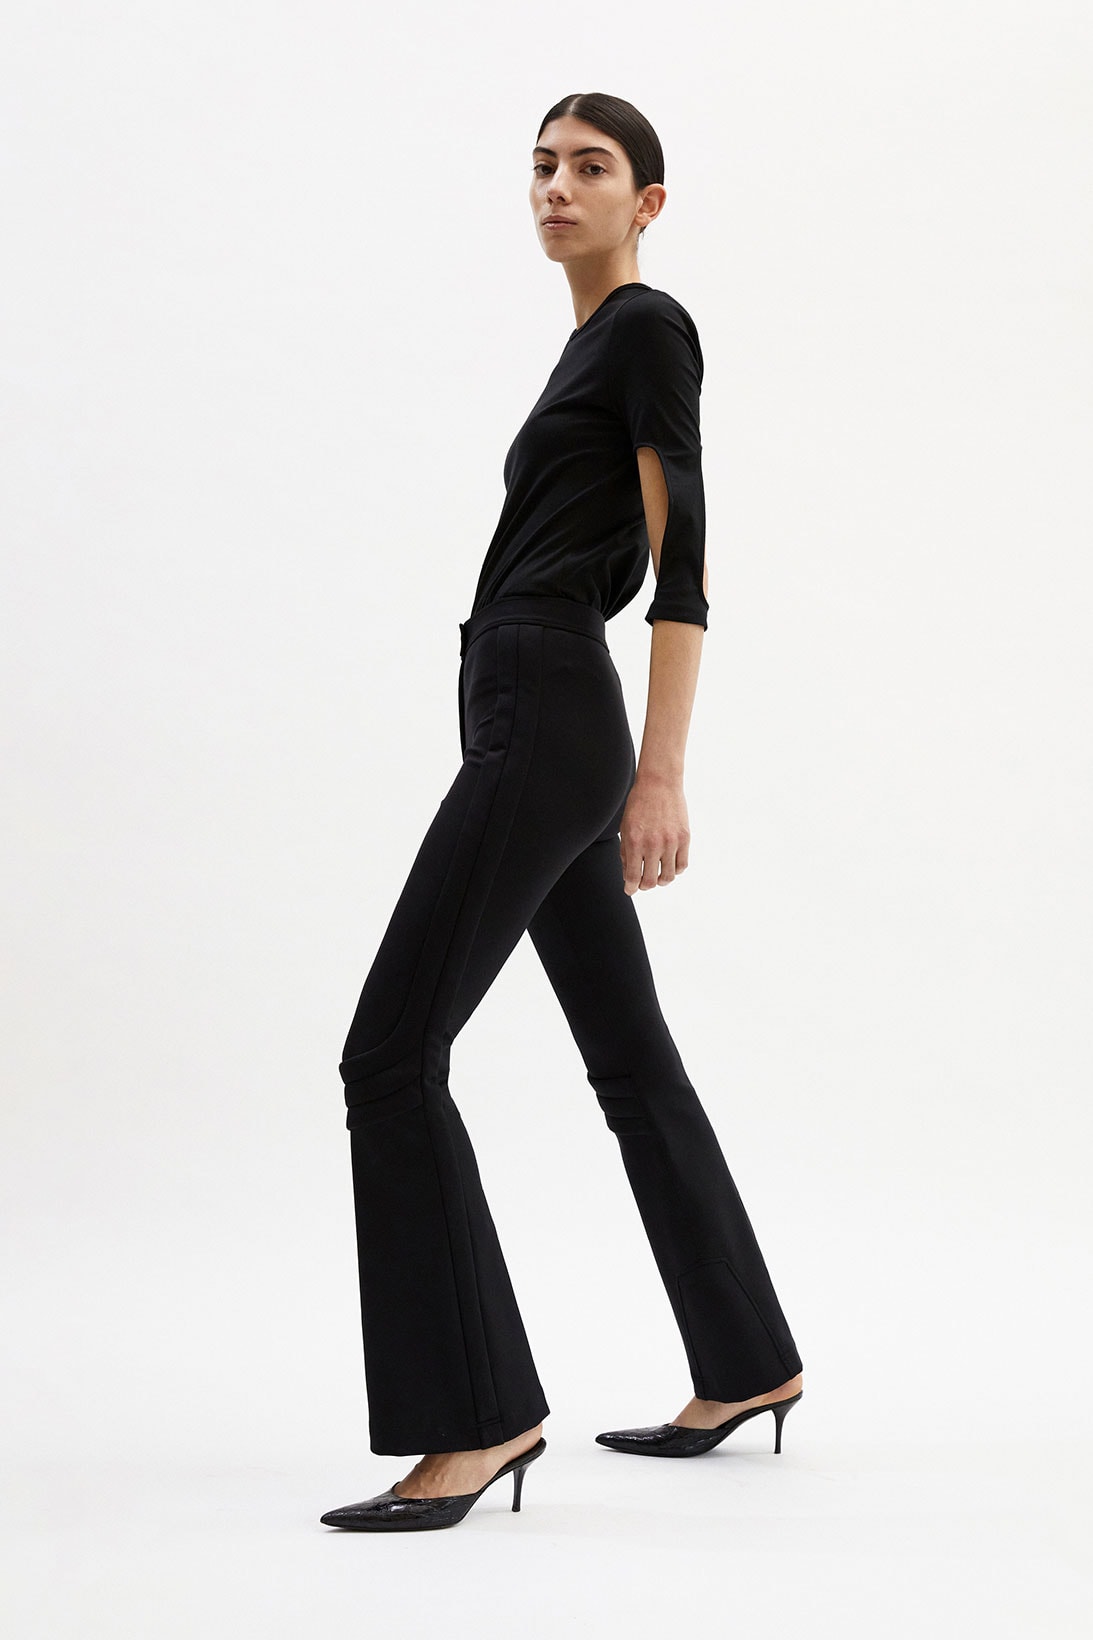 helmut lang fall winter 2021 fw21 collection lookbook black tee pants trousers